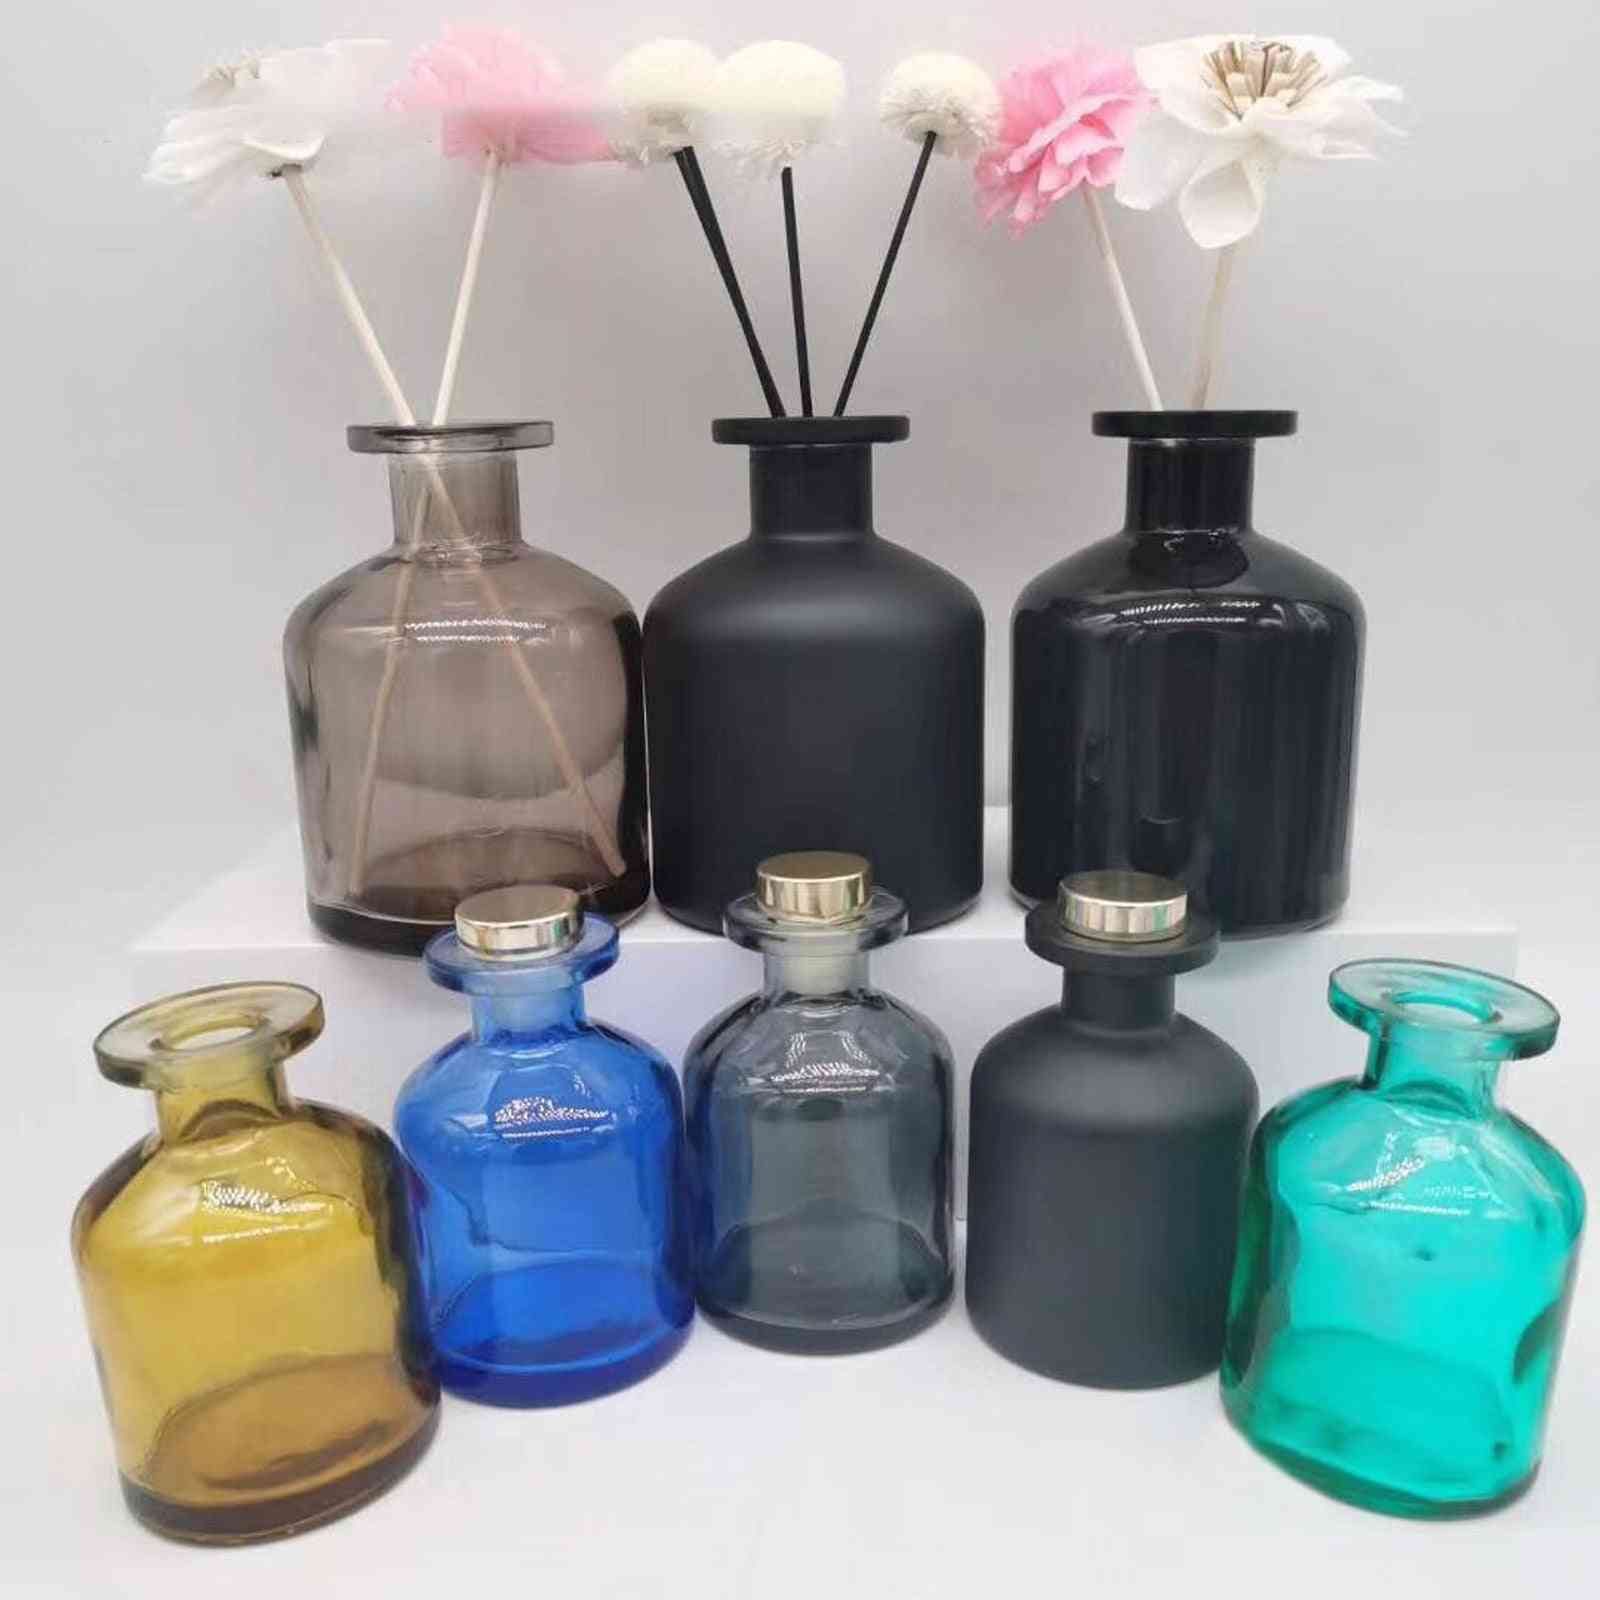 Fragrance Empty Bottles Can Use Rattan Sticks Purifying